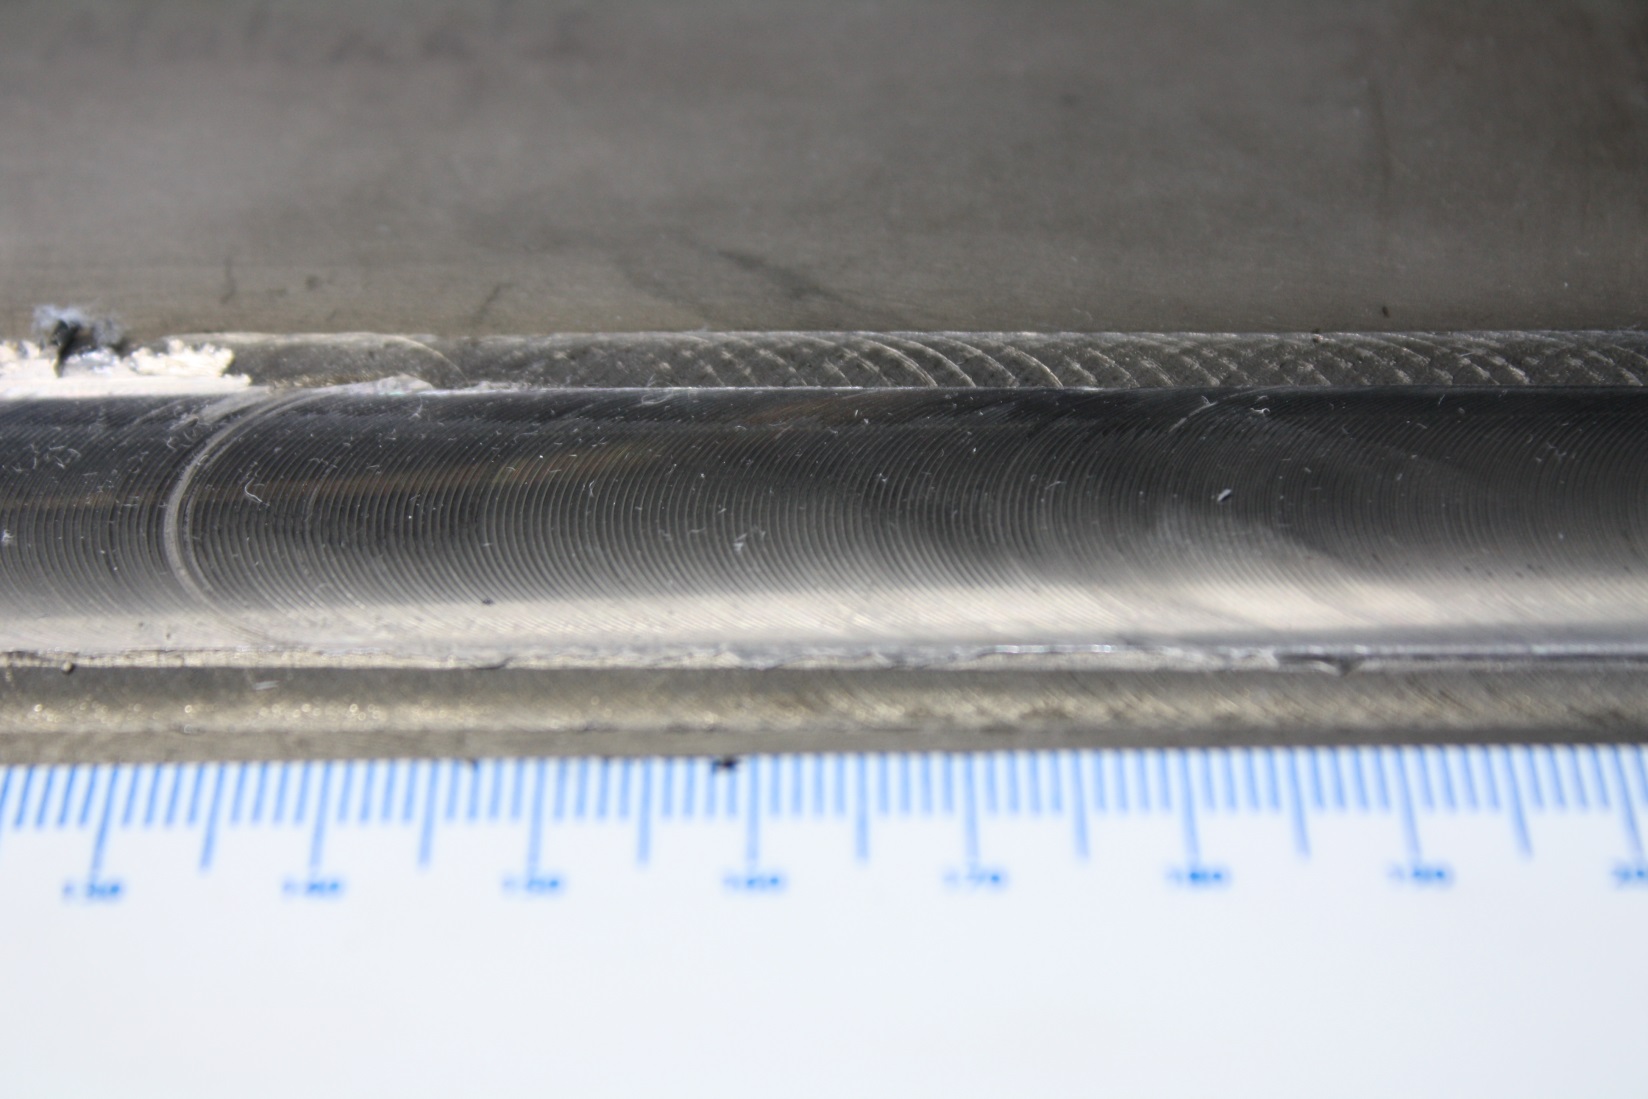 Detail of the surface of friction stir welded MA956 showing a smooth, high-quality butt weld